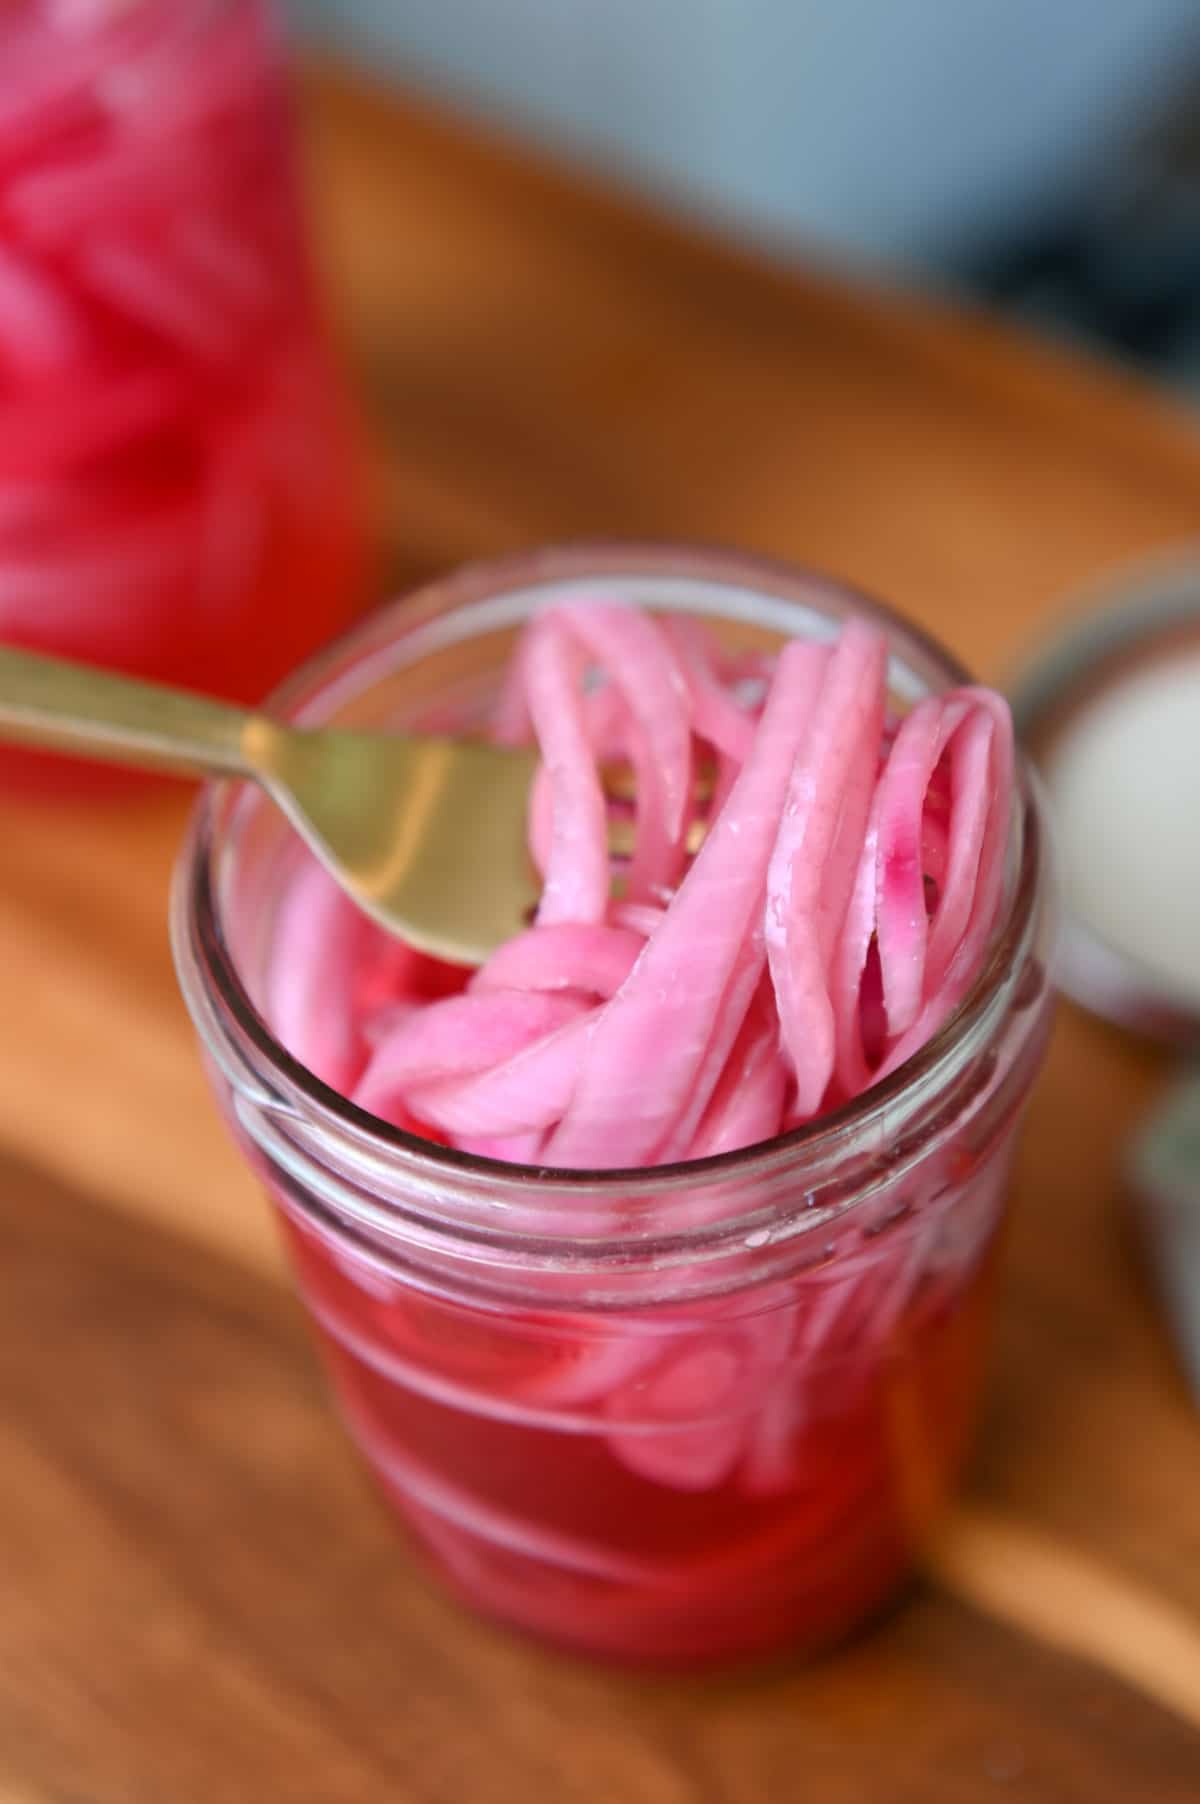 Gold fork lifting slices of pickled red onion out of a glass jar.